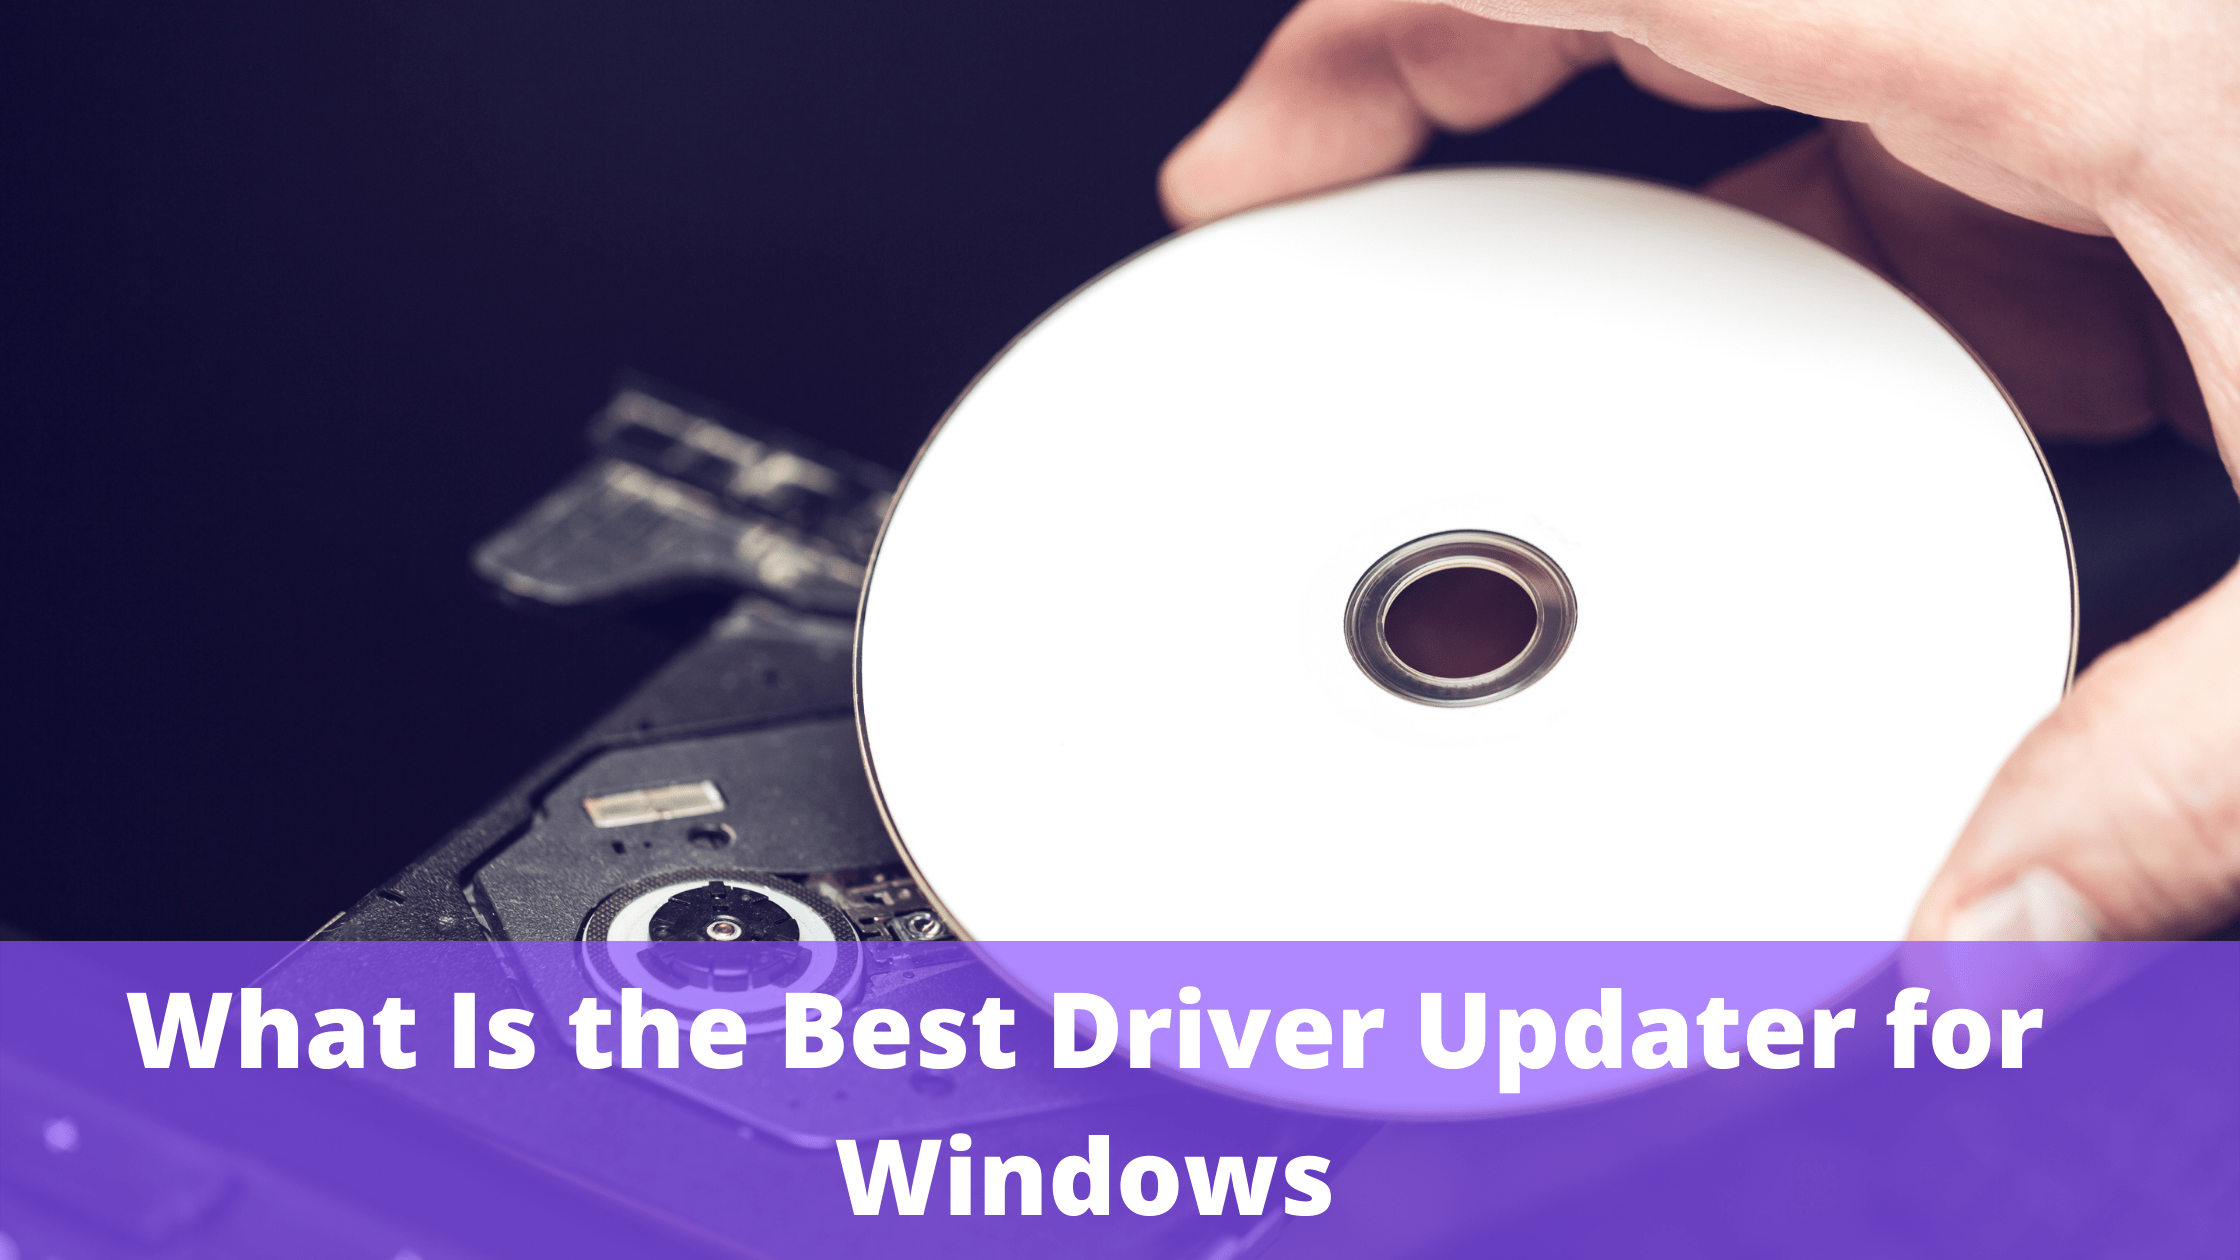 What Is the Best Driver Updater for Windows